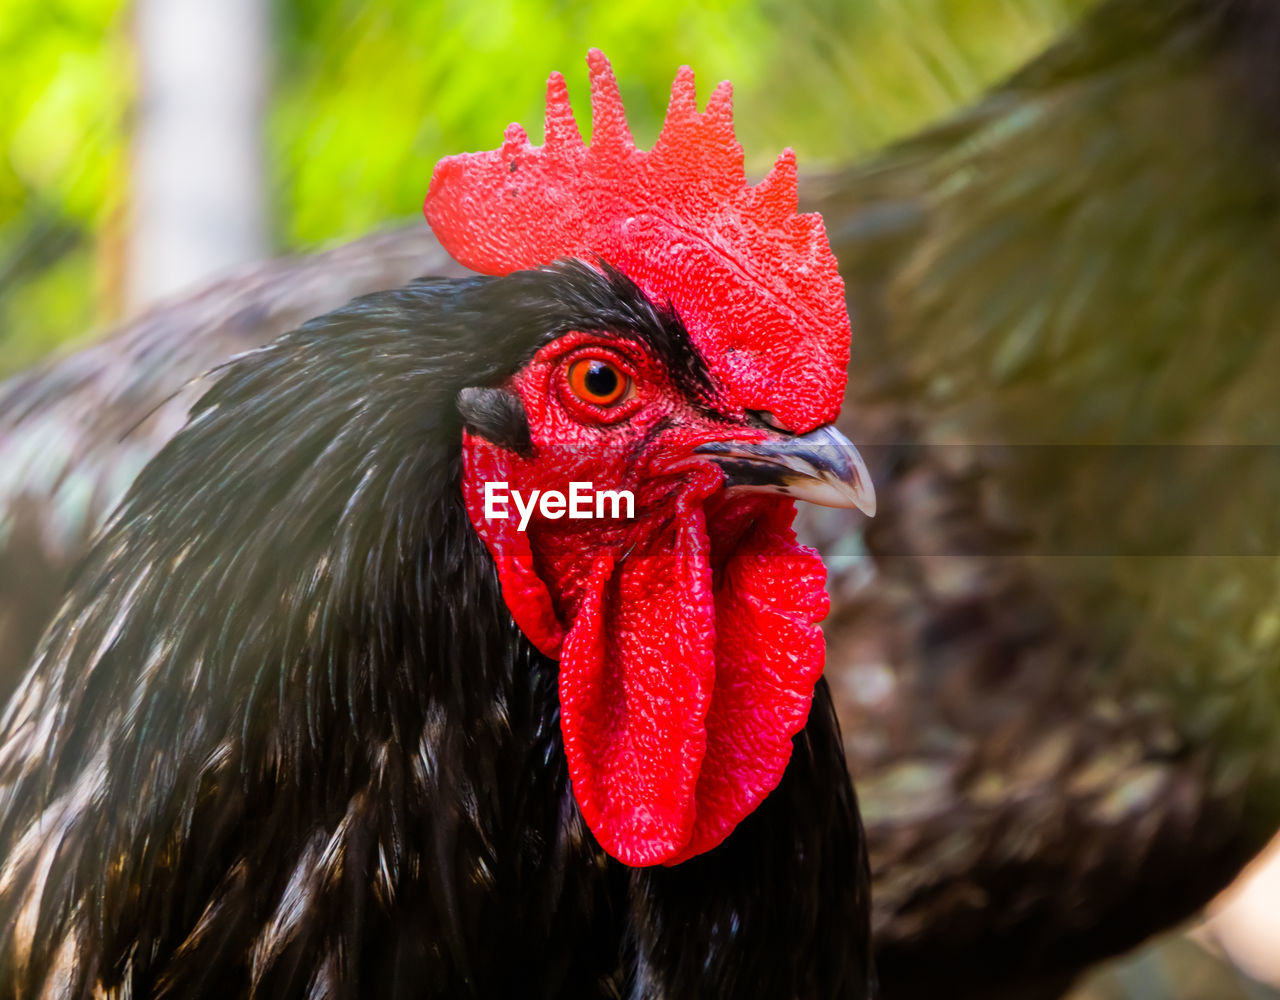 animal themes, animal, bird, livestock, domestic animals, chicken, rooster, pet, one animal, mammal, beak, agriculture, red, animal body part, close-up, comb, nature, cockerel, fowl, animal head, no people, farm, outdoors, poultry, portrait, focus on foreground